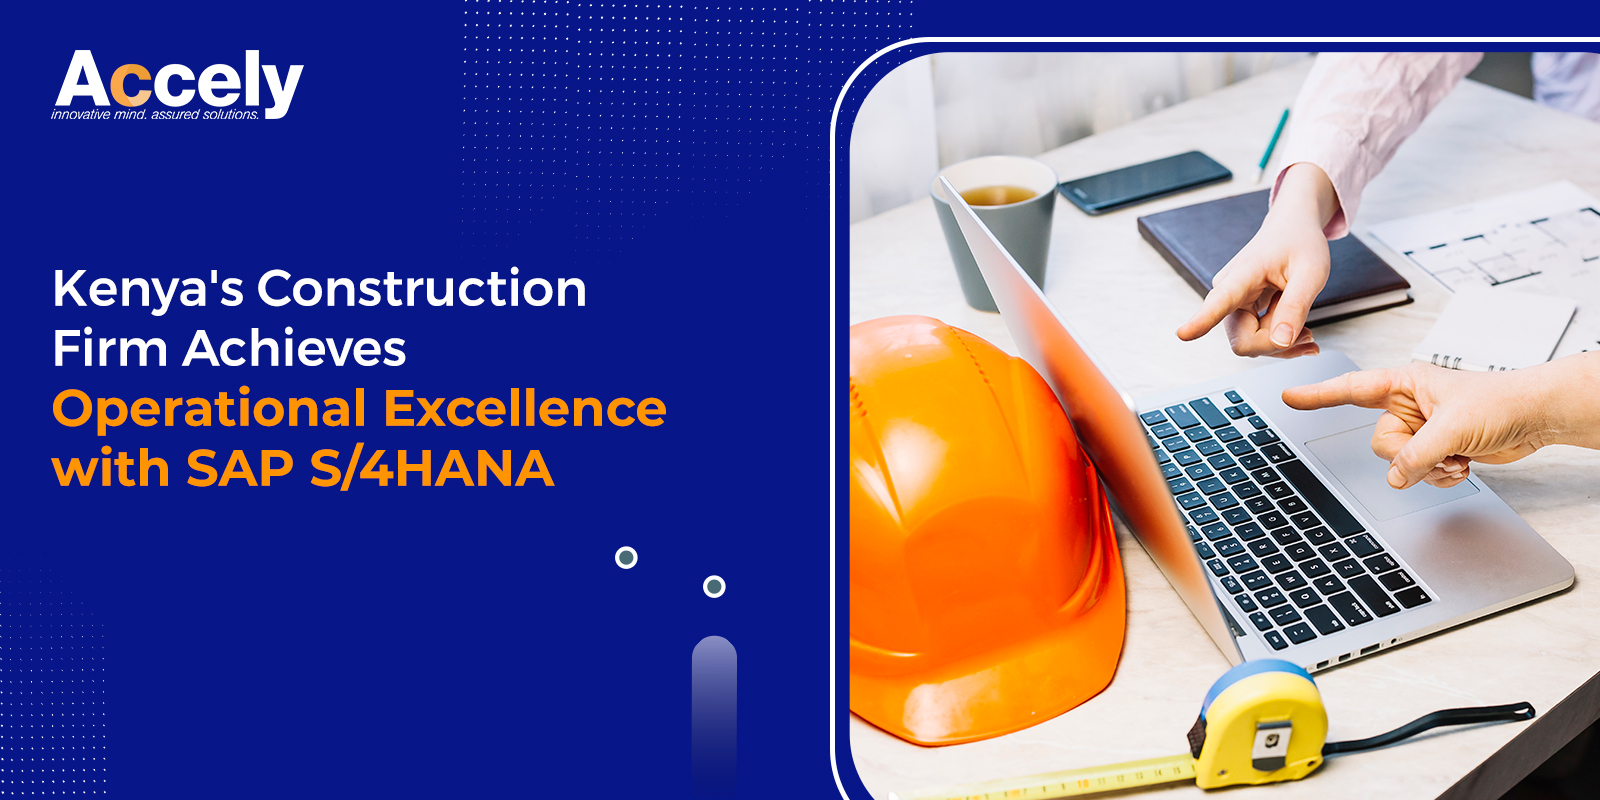 Kenya's Construction Firm Achieves Operational Excellence with SAP S/4HANA